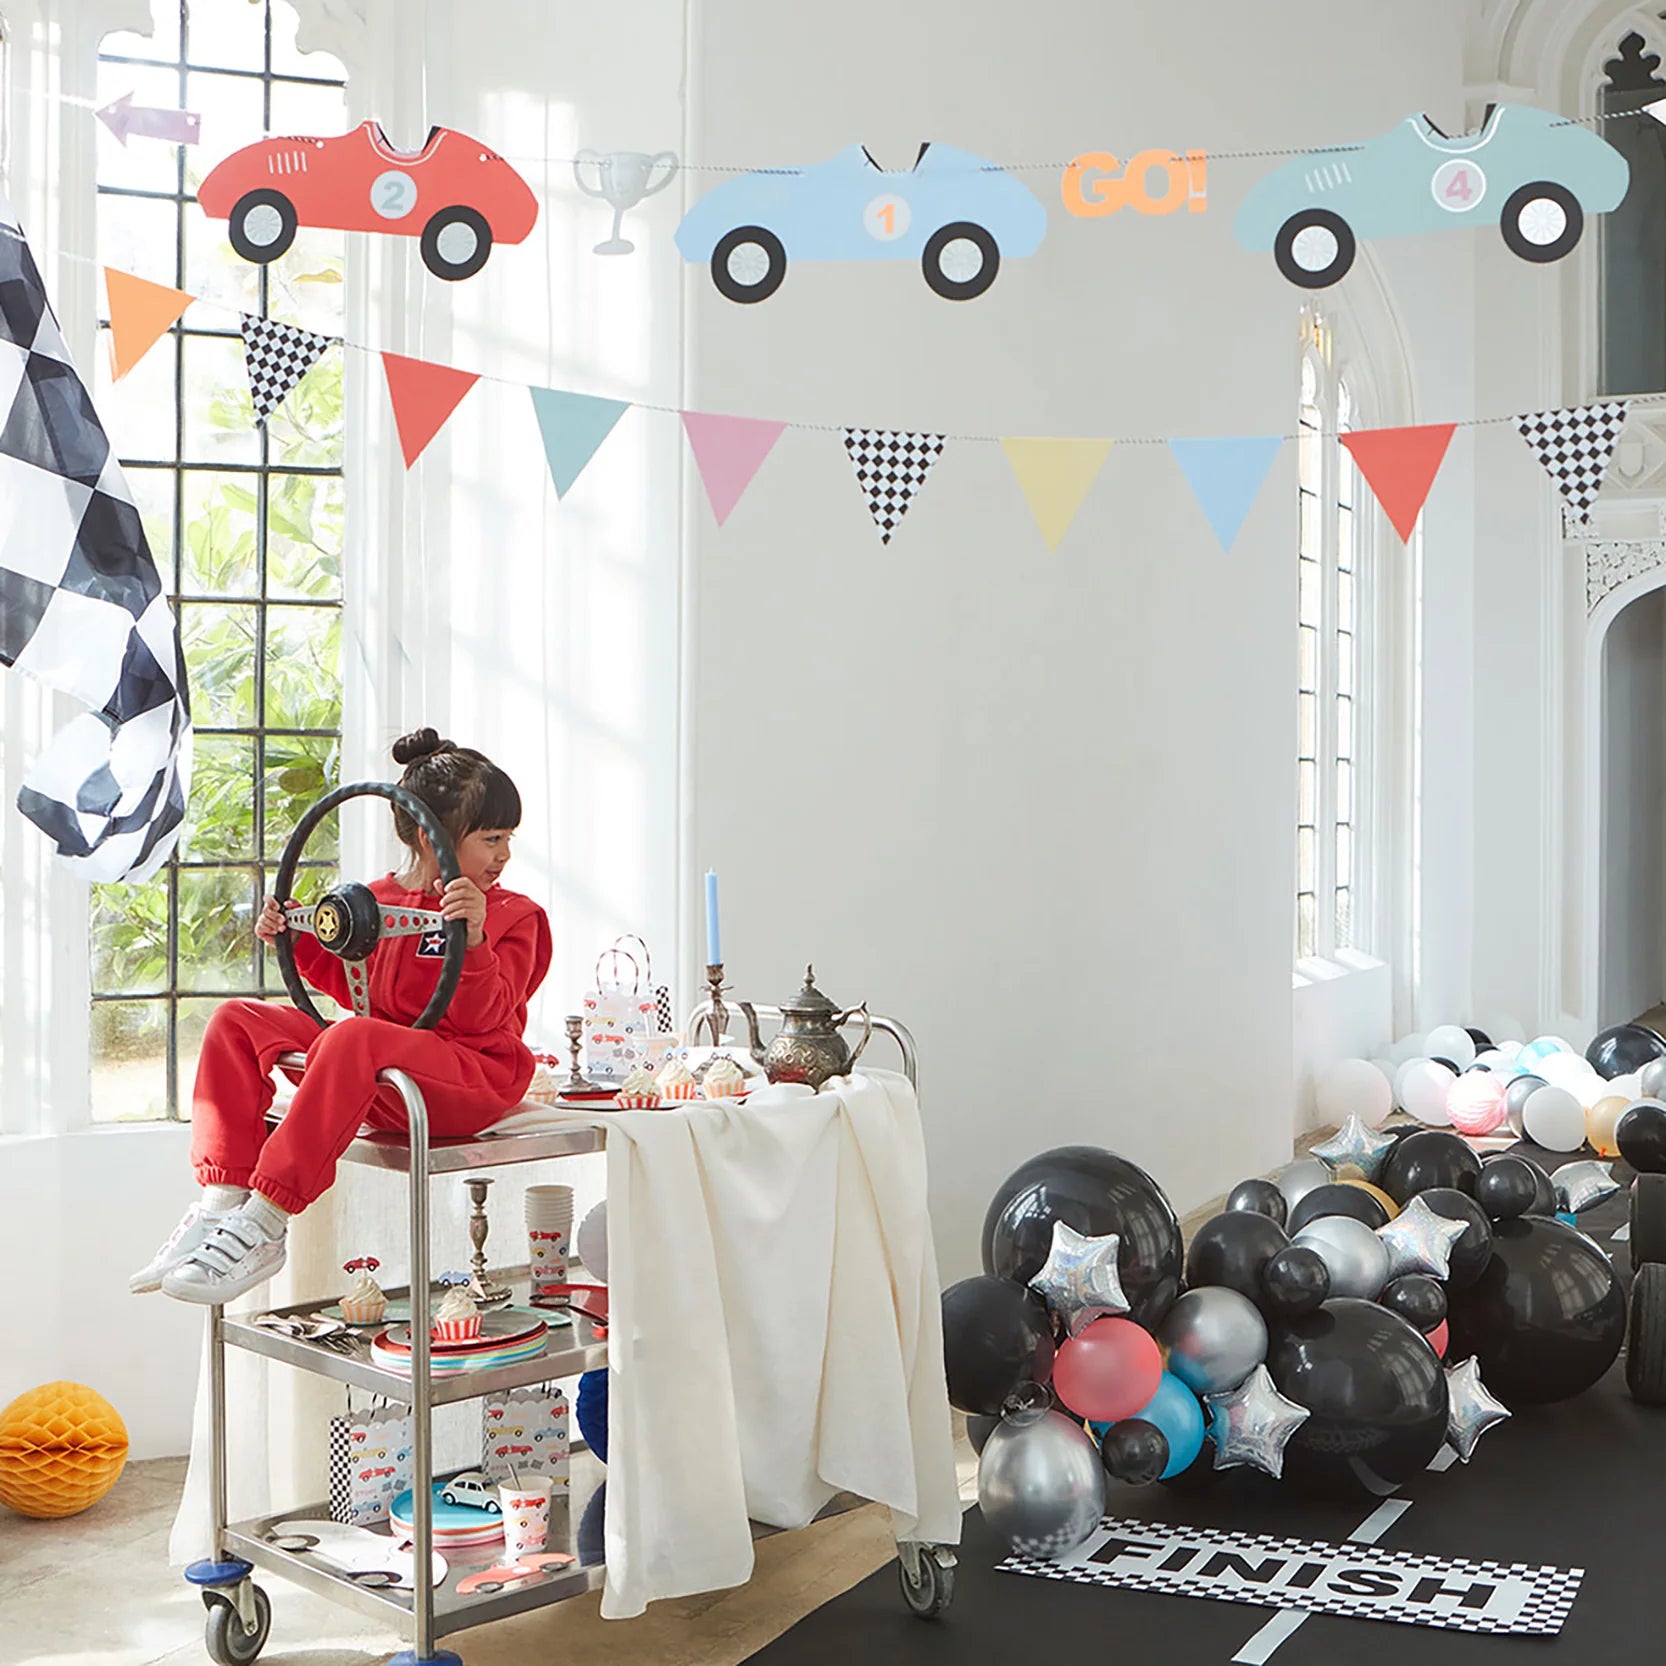 Vintage Race Cars Garland Set 6ft | The Party Darling